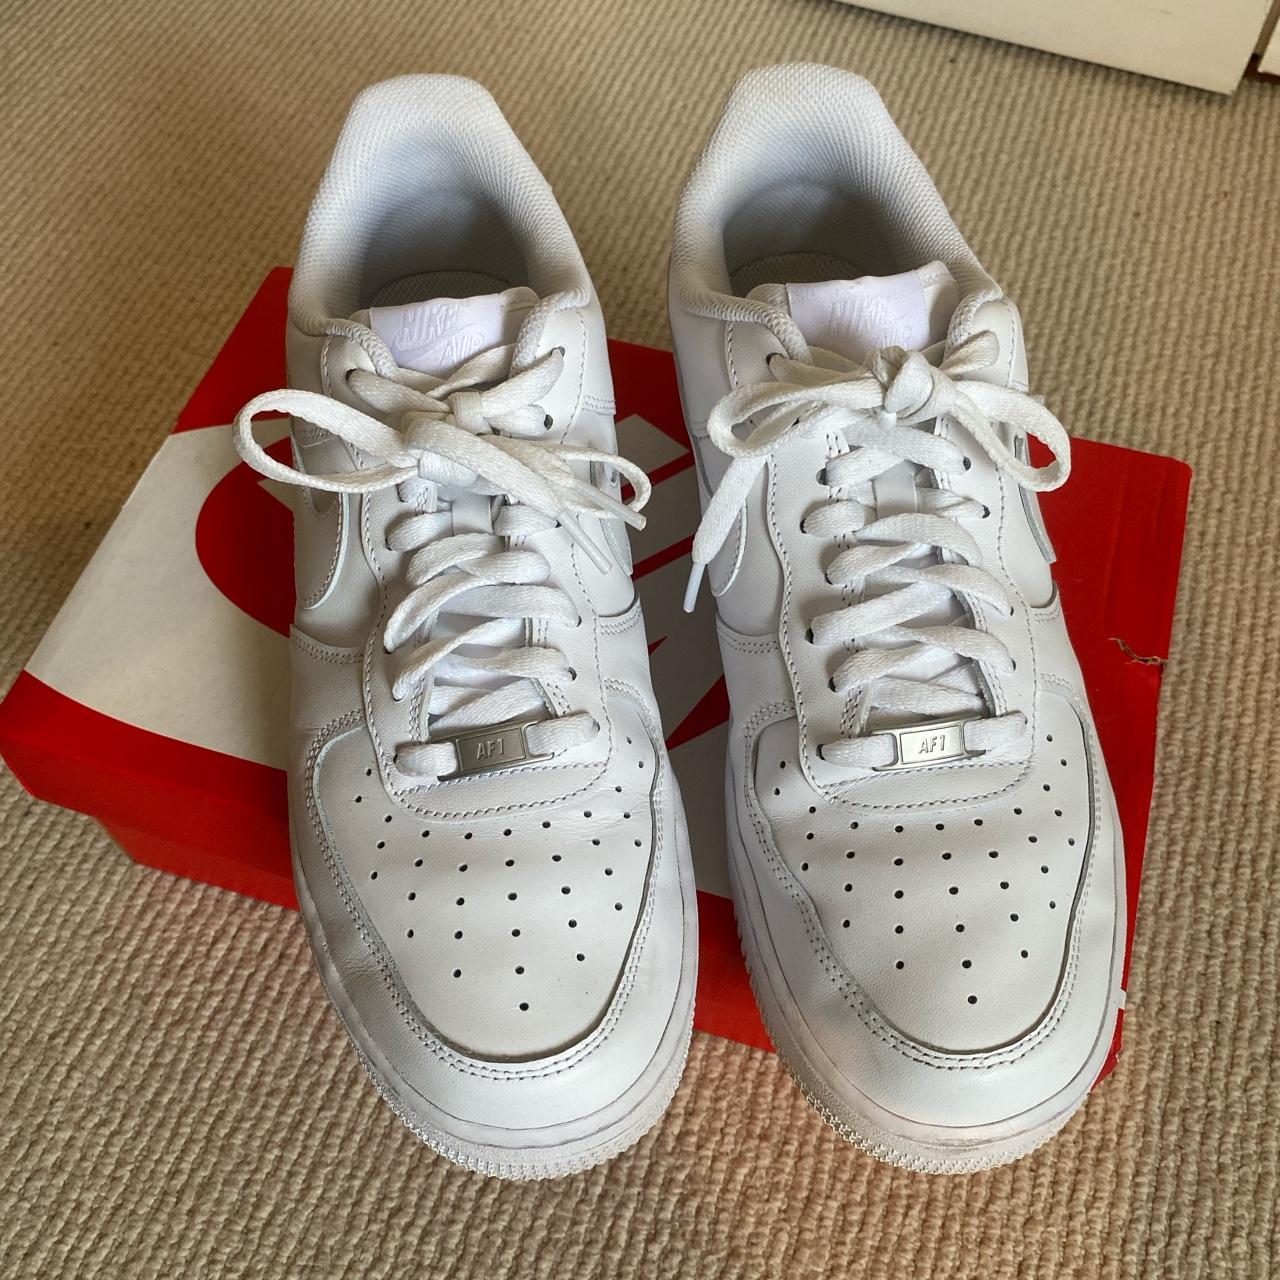 Men’s Air Force 1 size 9 Been worn once, come with... - Depop